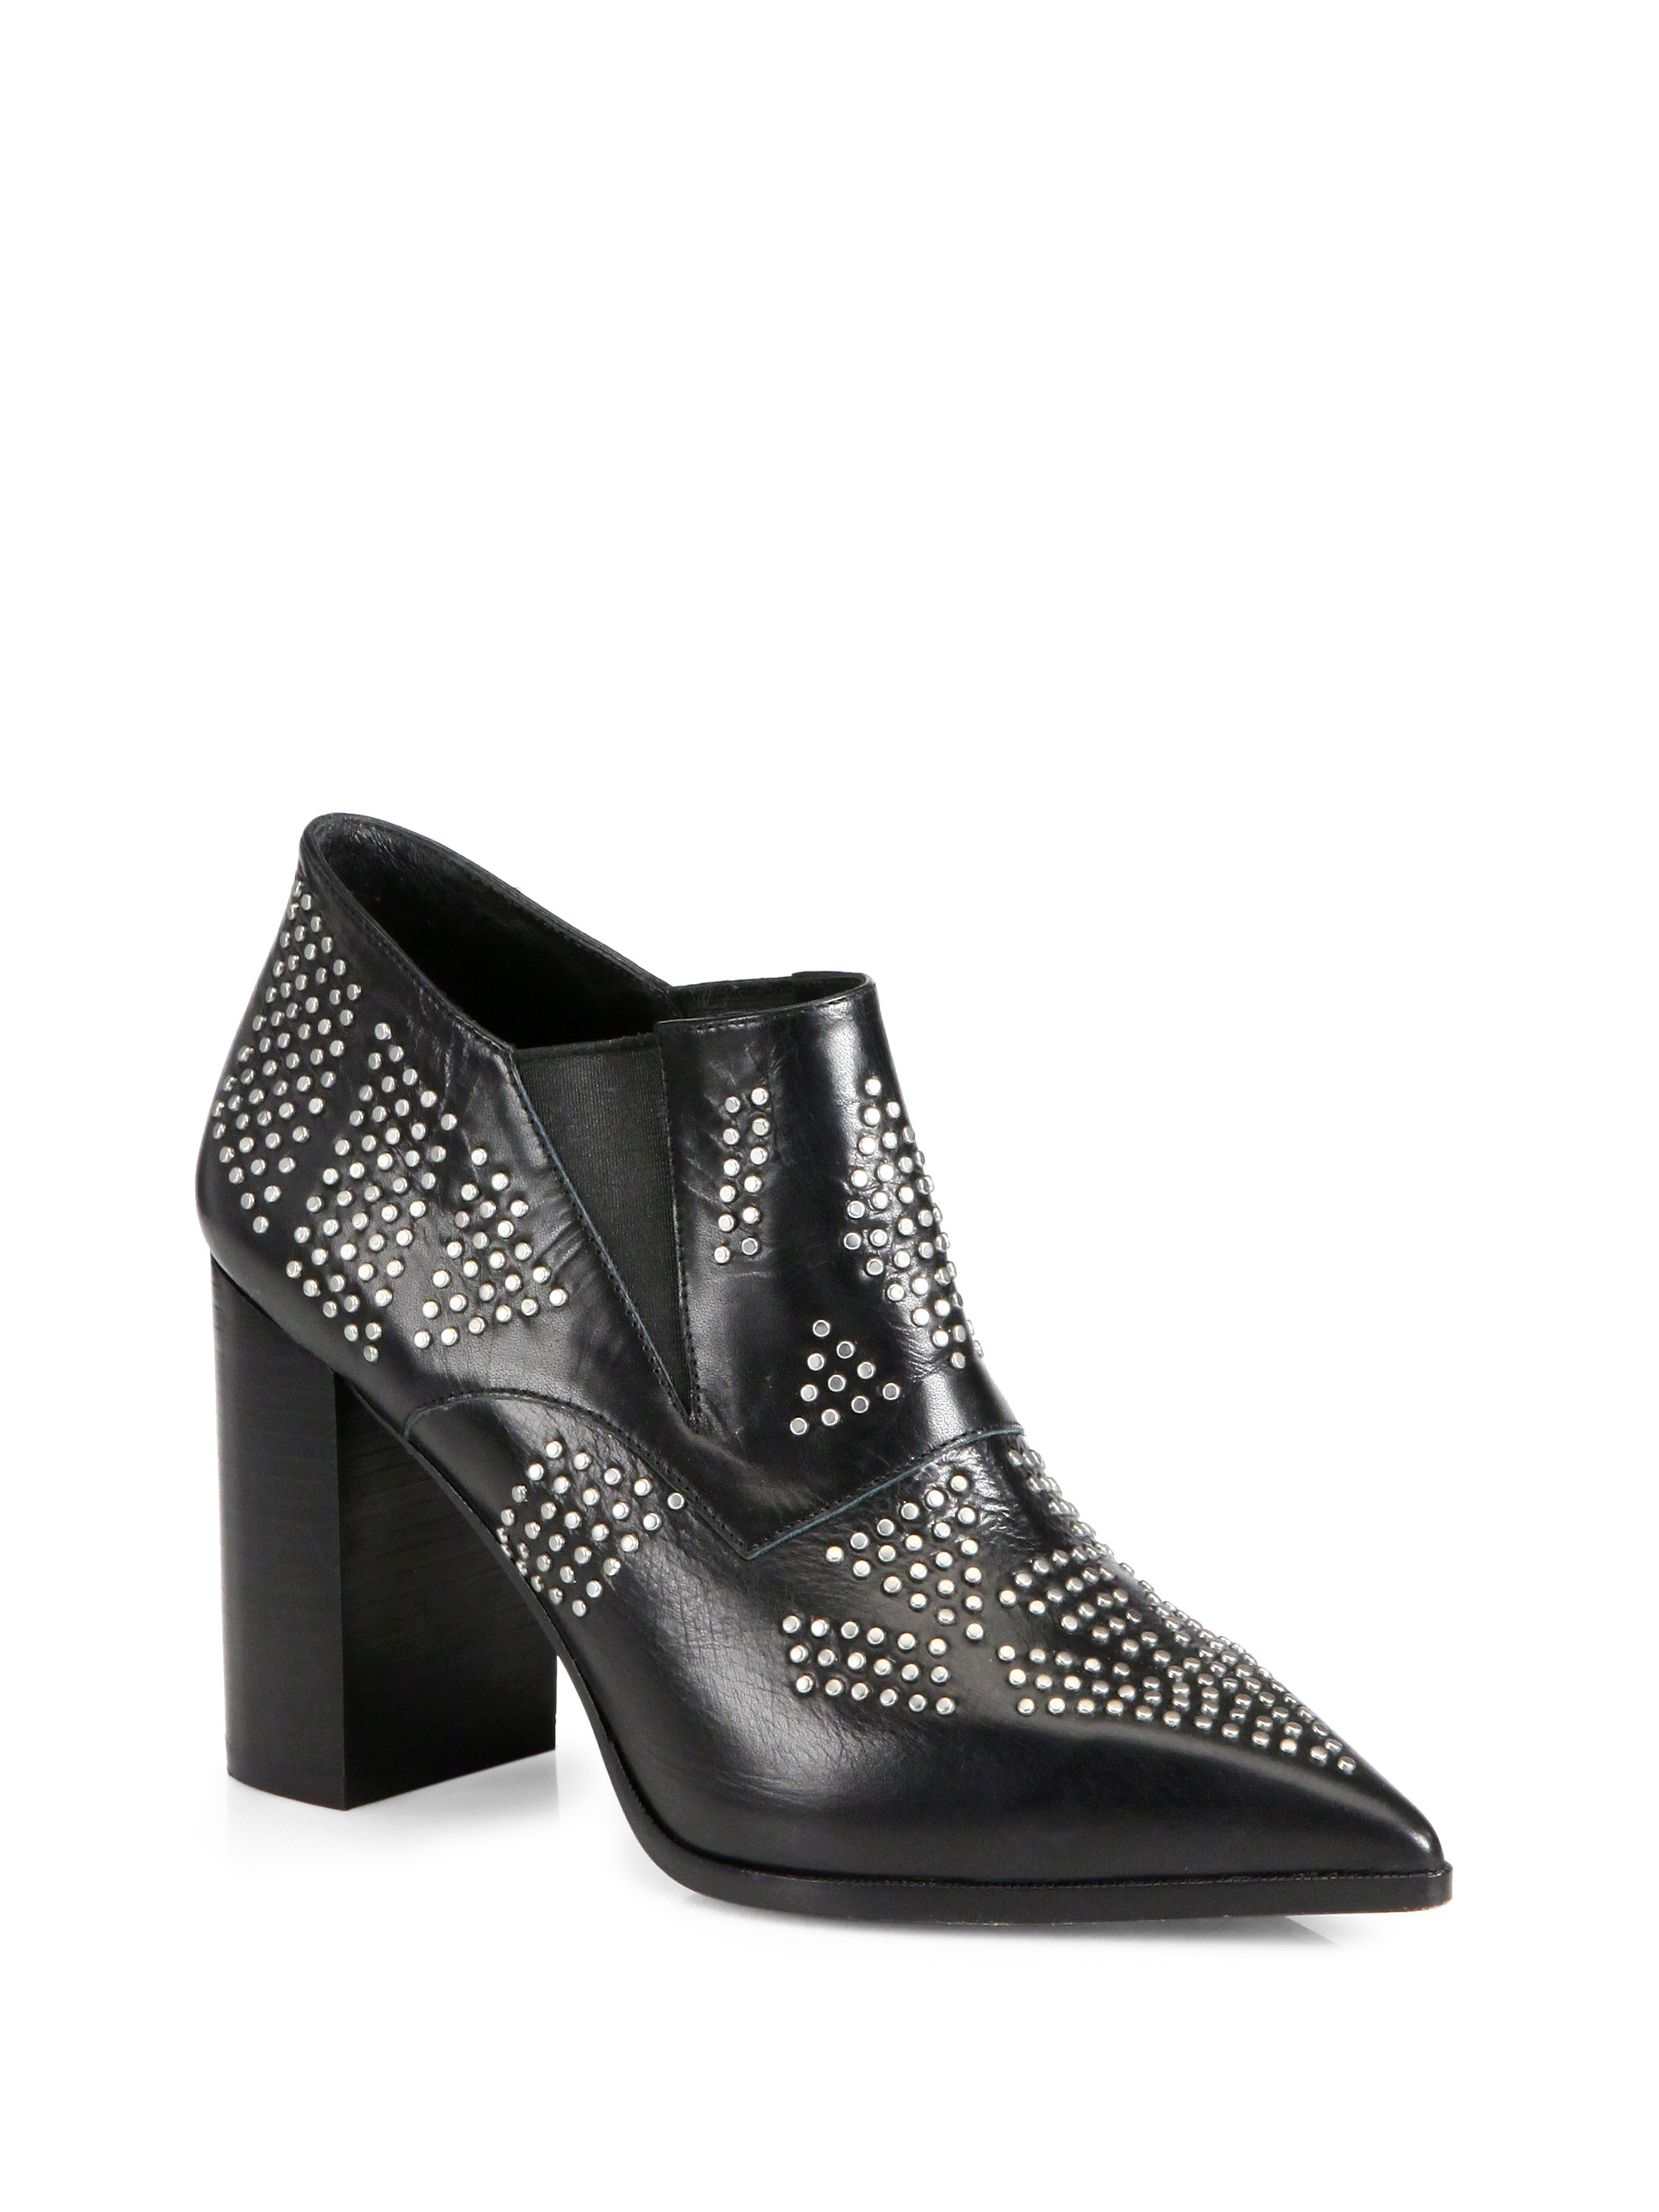 See by chloé Studded Leather Ankle Boots in Black | Lyst